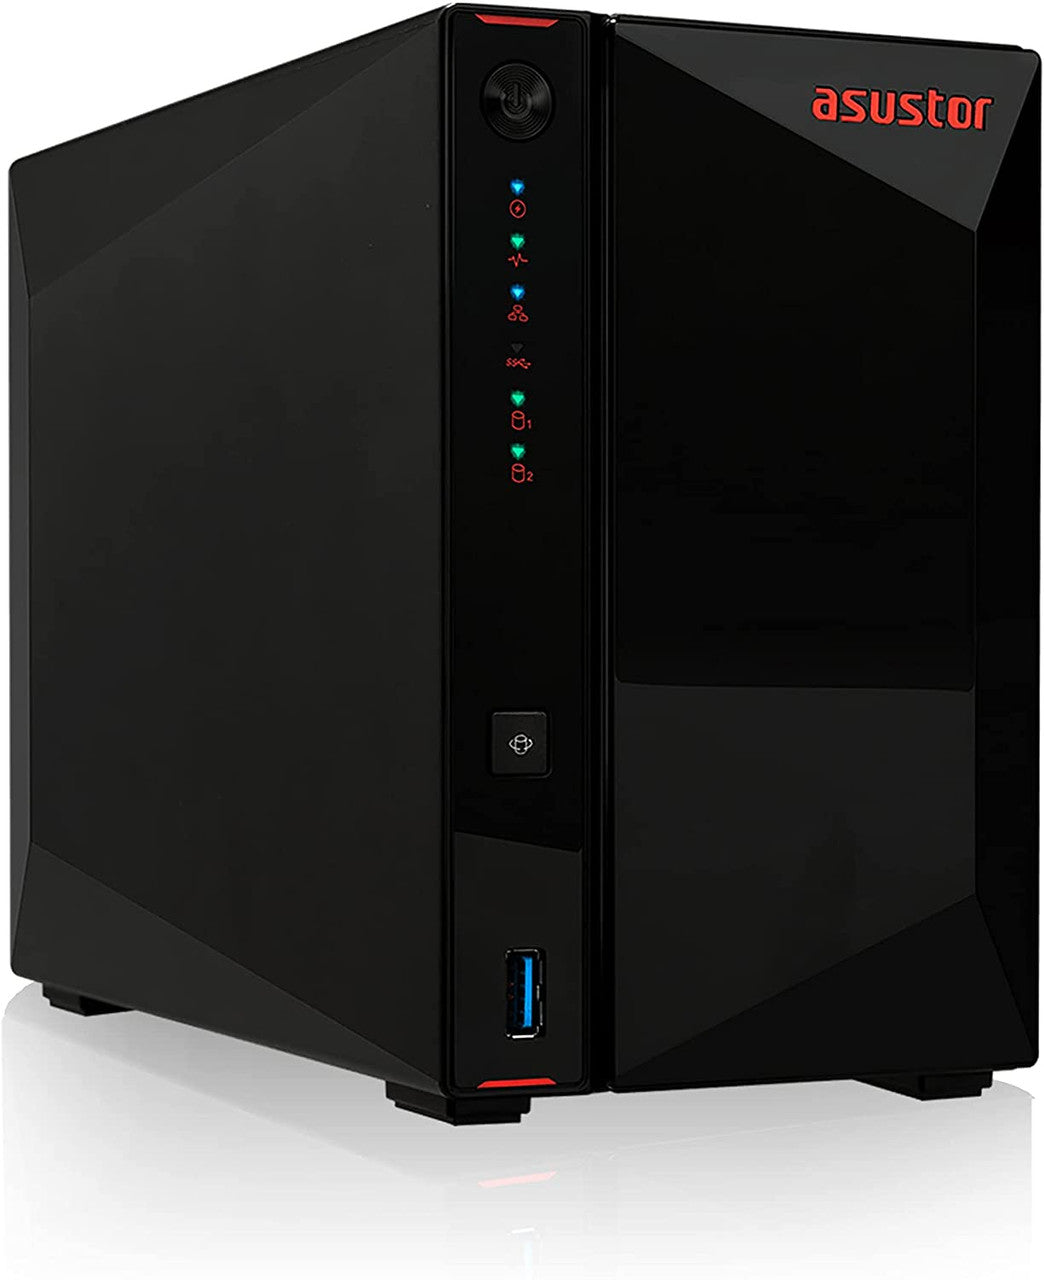 Asustor AS5202T 2-Bay Nimbustor 2 NAS with 2GB RAM and 24TB (2 x 12TB) Seagate Ironwolf NAS Drives Fully Assembled and Tested